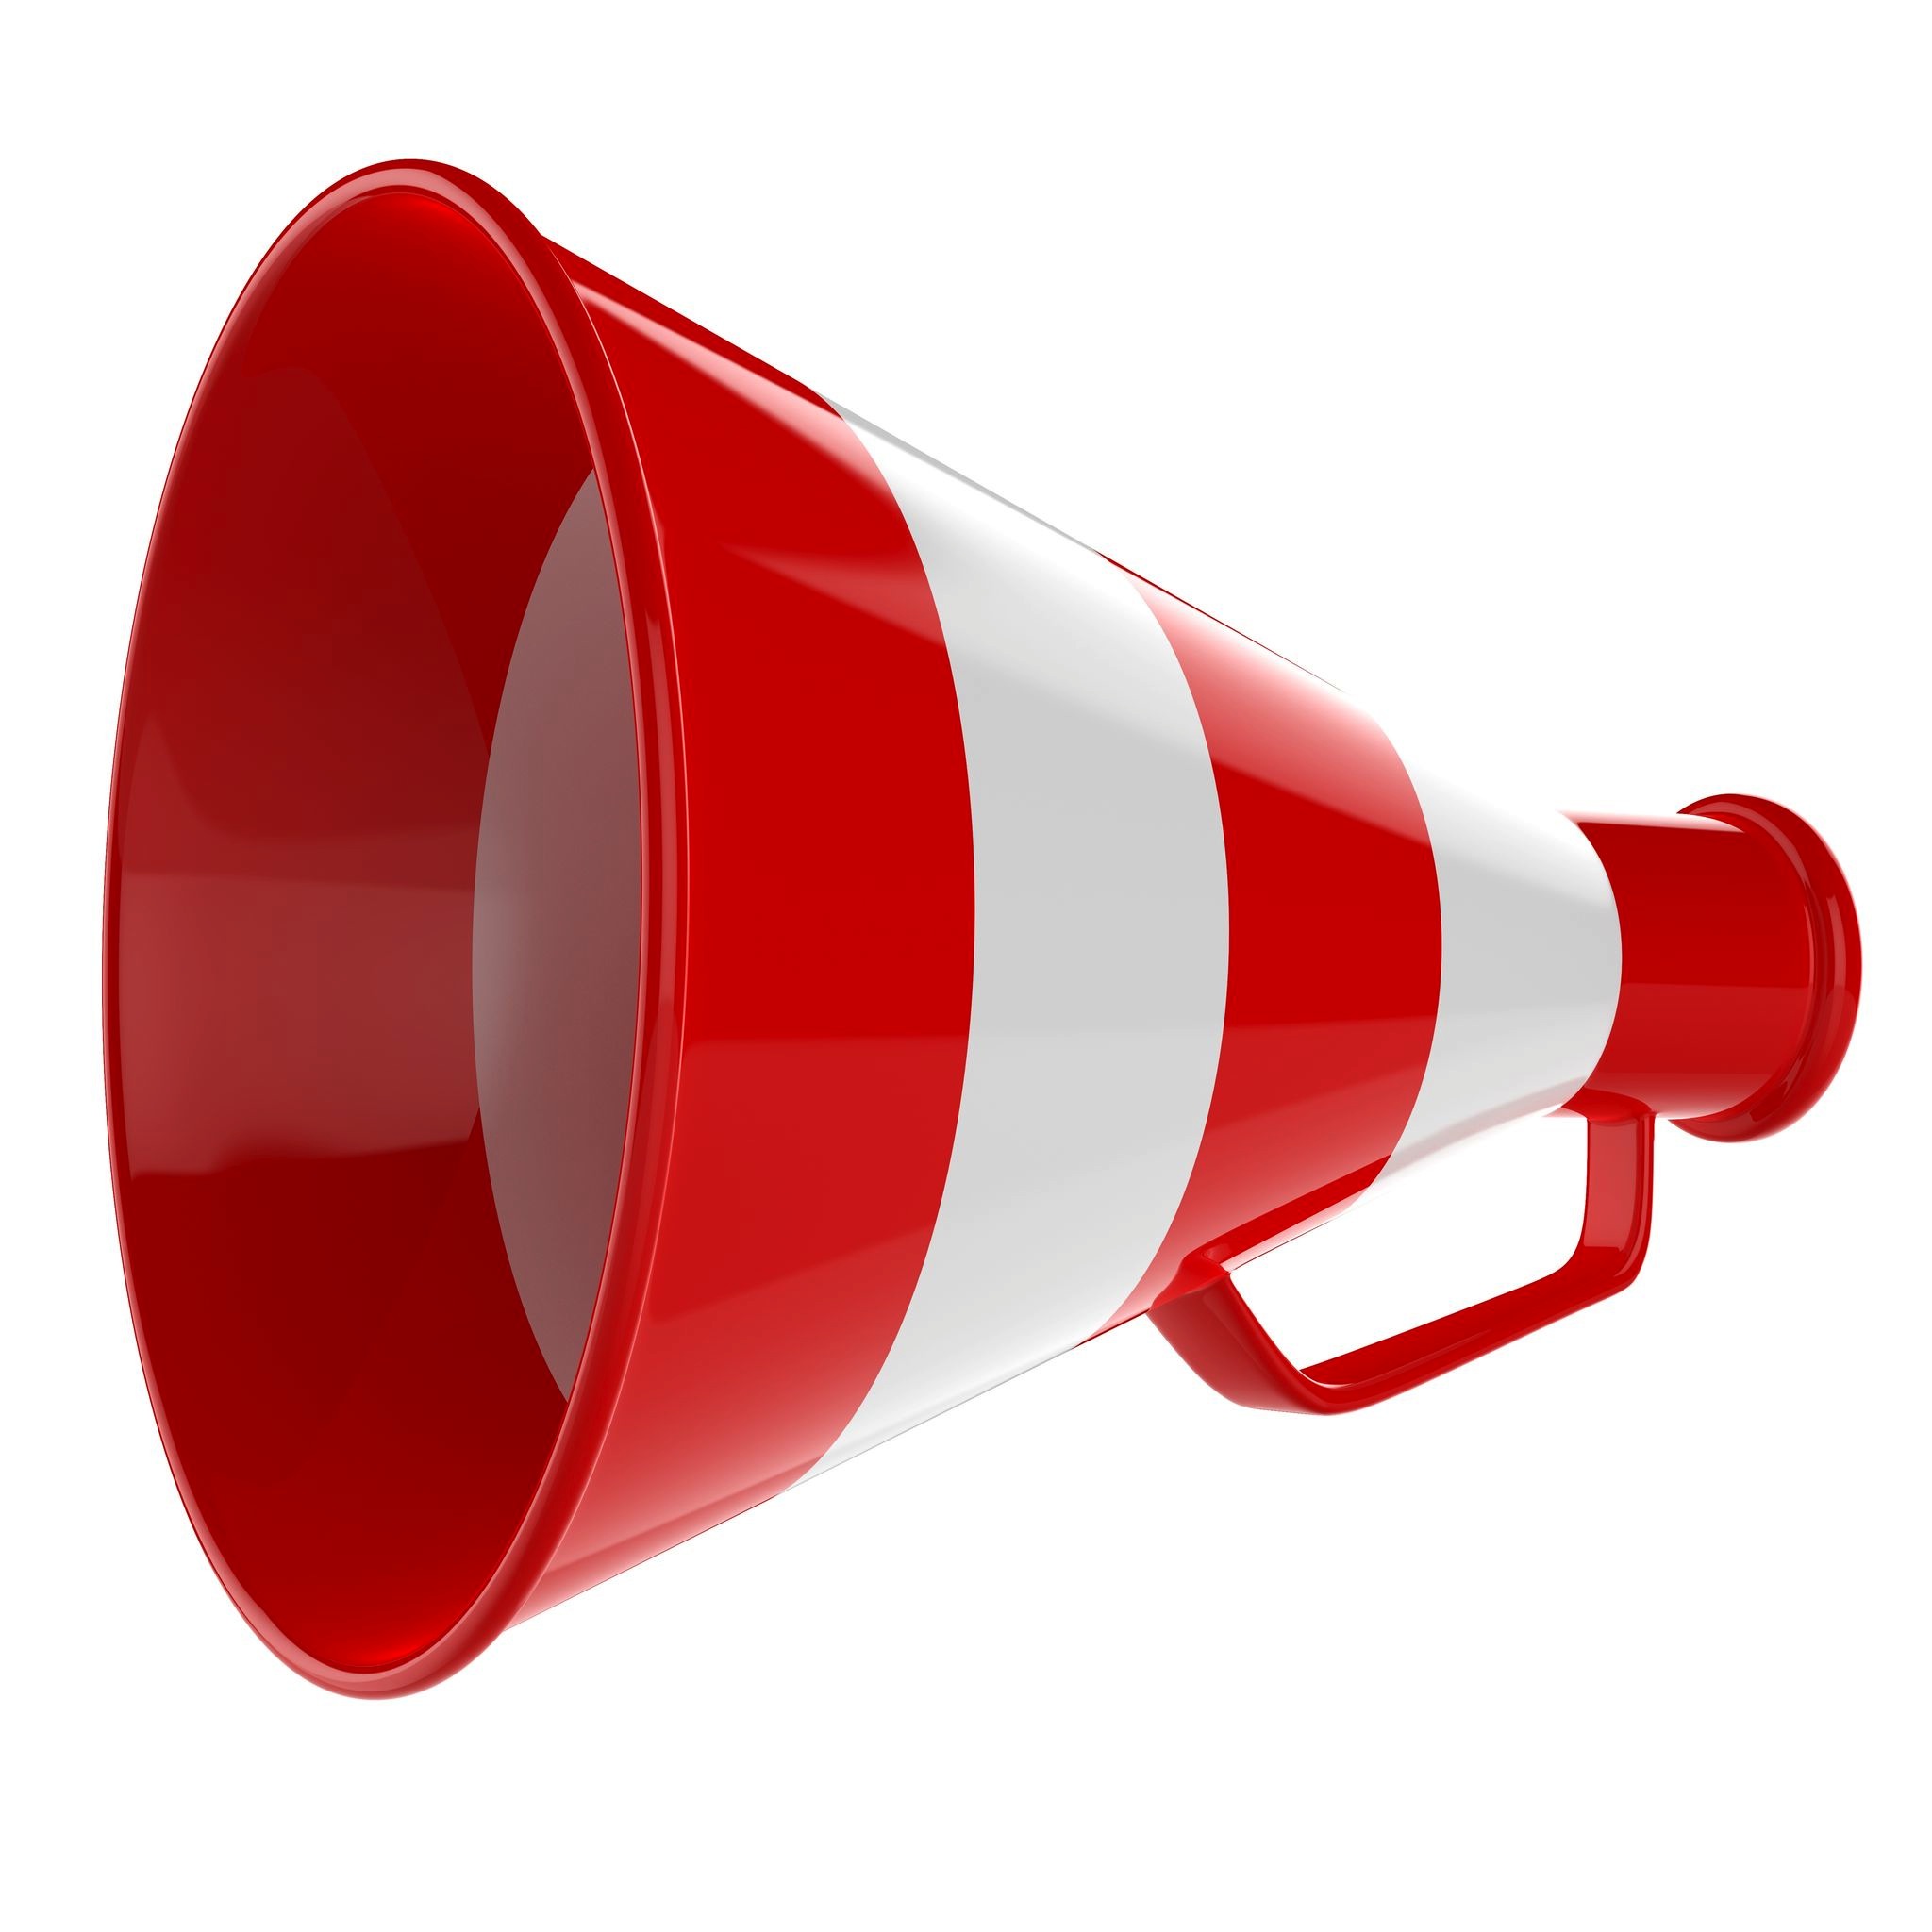 Red Cheering Megaphone Image Free Download Clipart